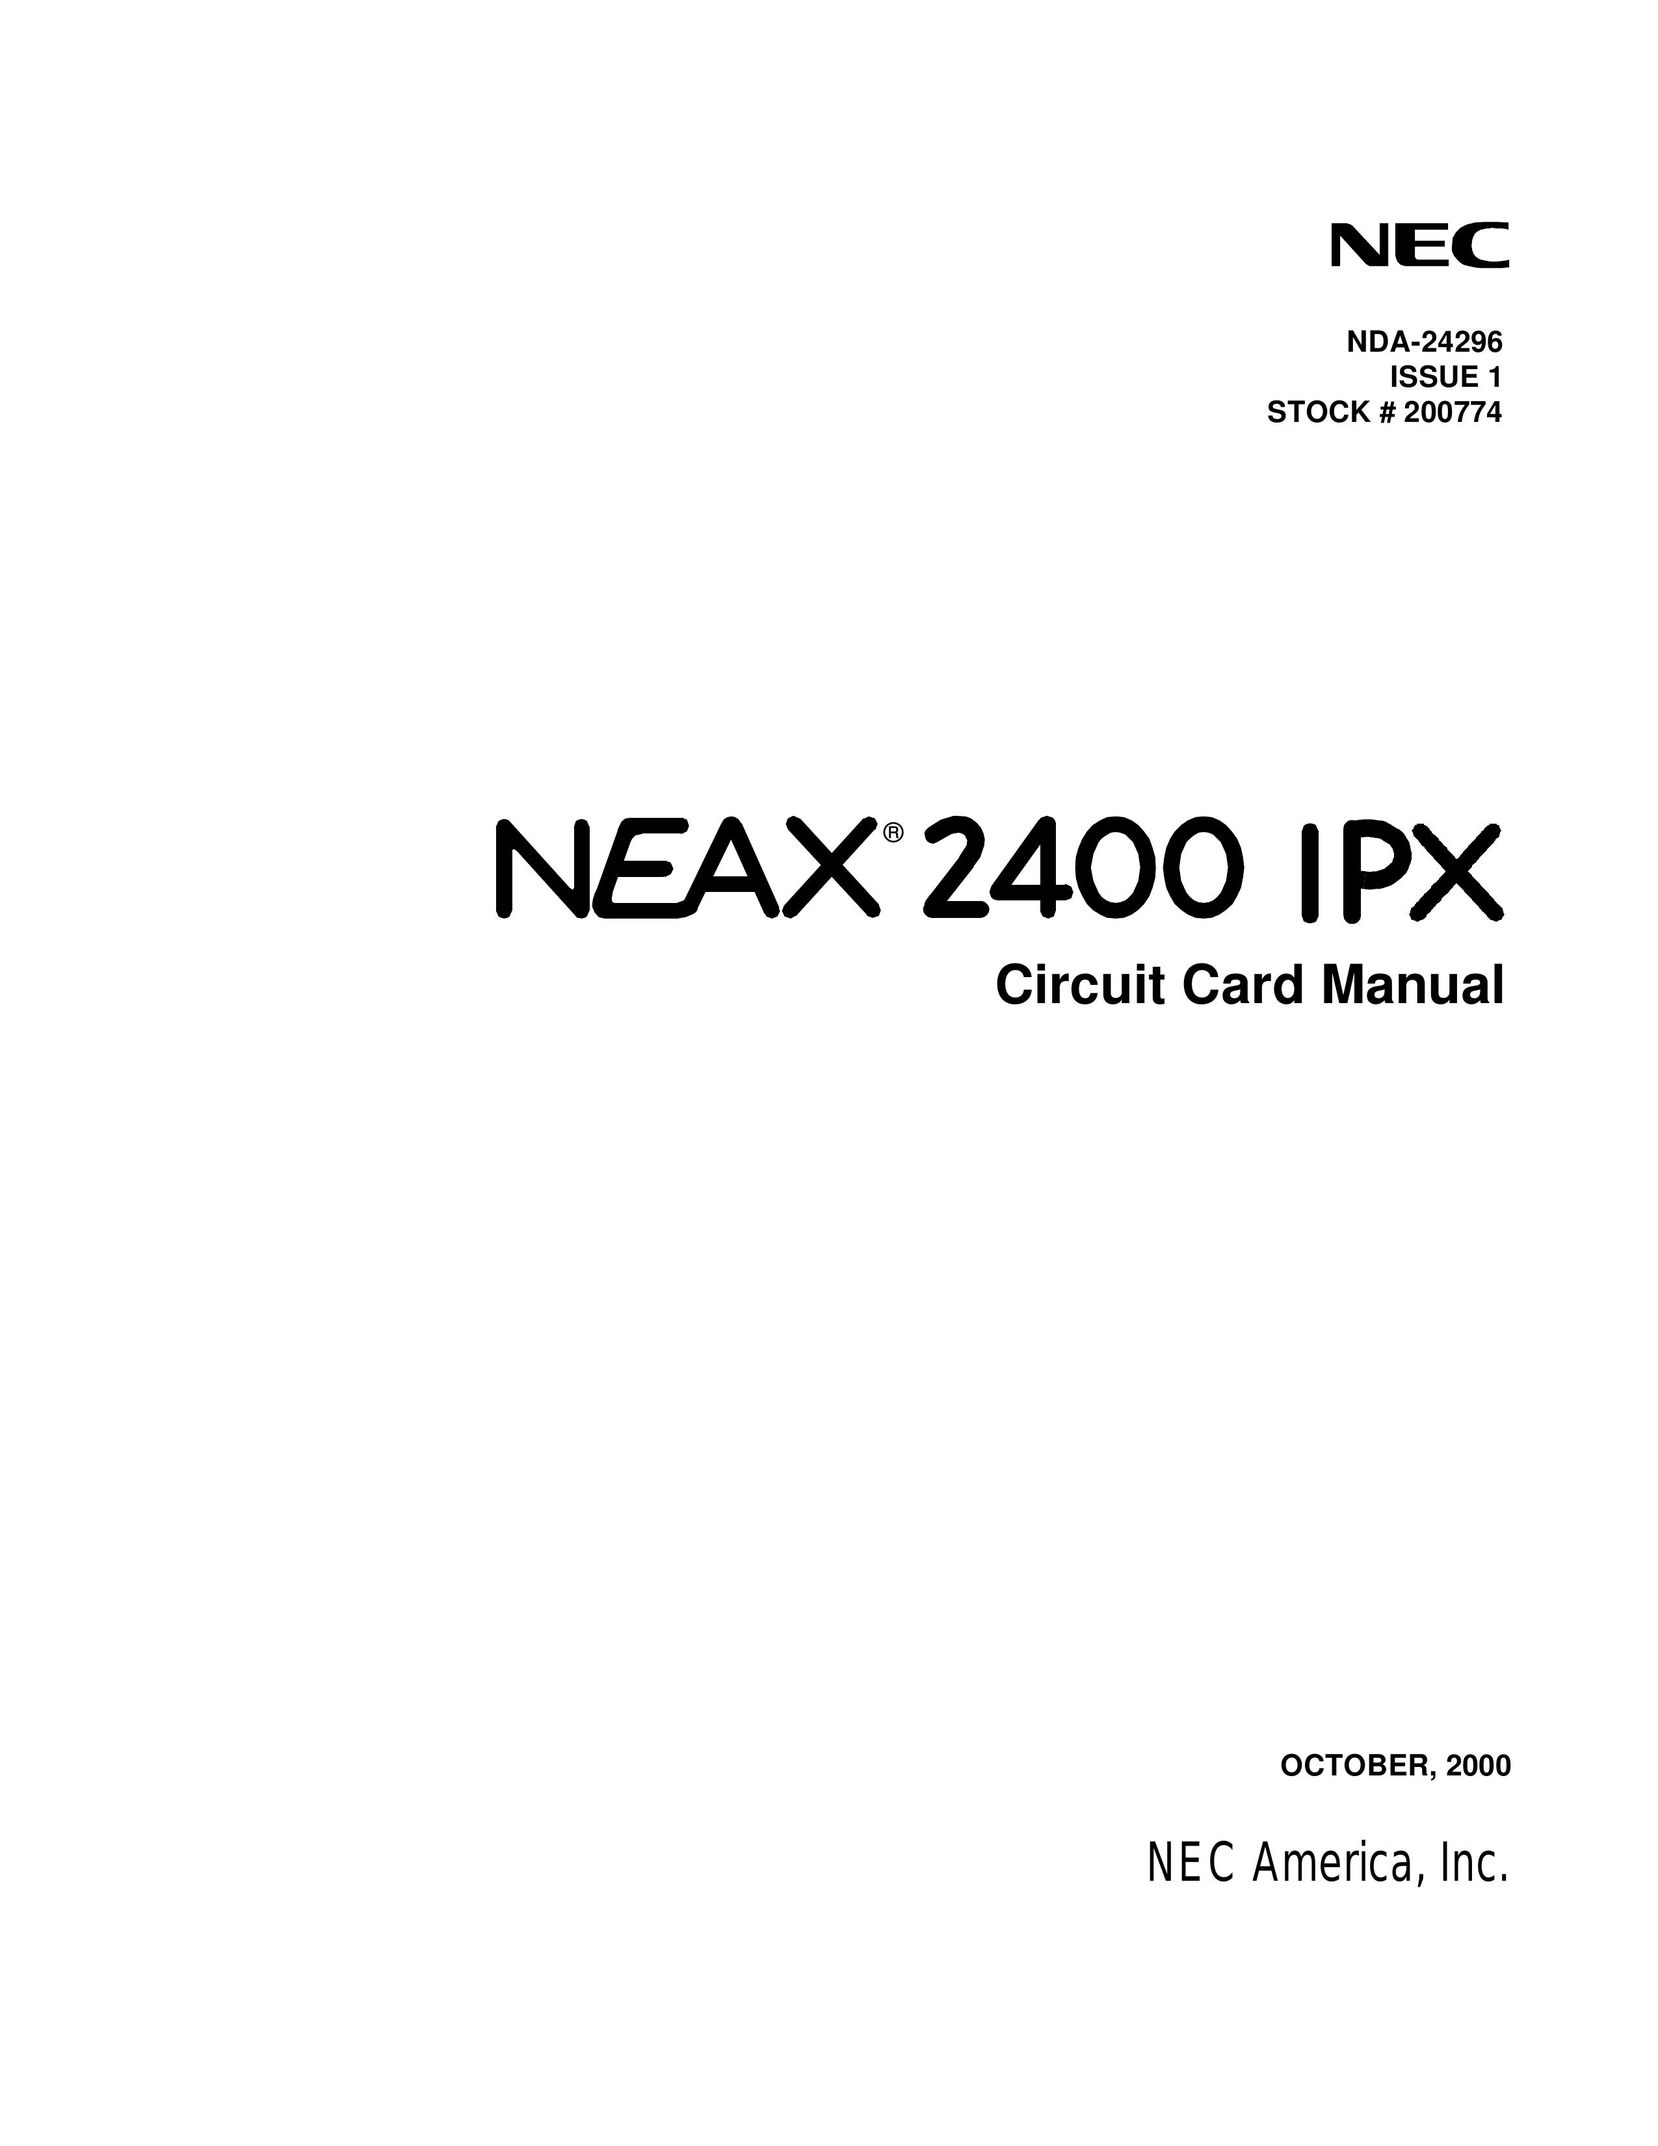 NEC 2400 IPX Whiteboard Accessories User Manual